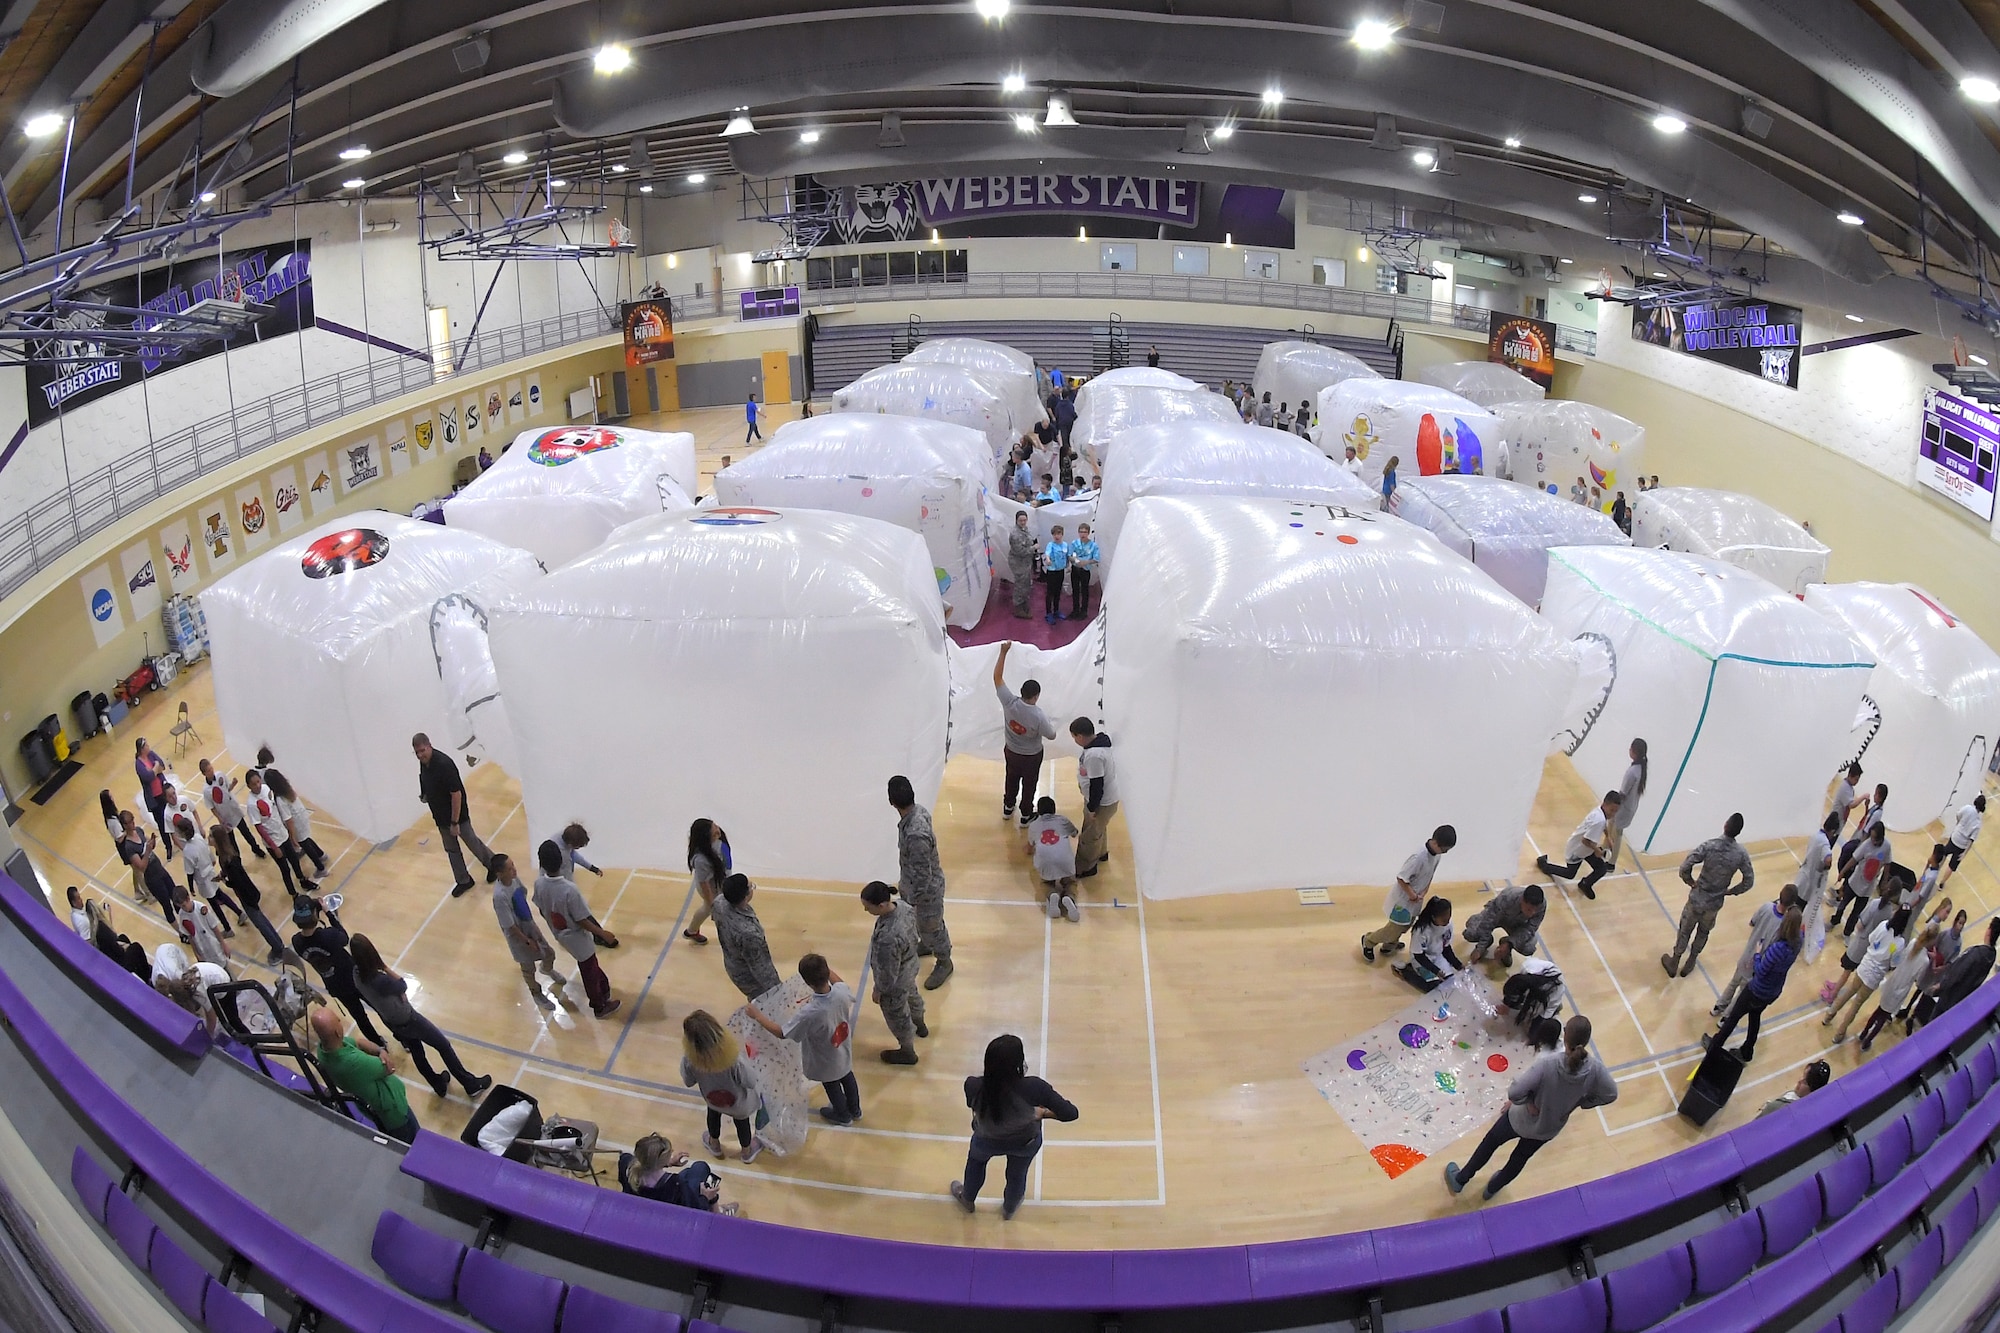 Fifth grade students inflate simulated space habitats during ‘Mission to Mars’ at Weber State University May 2, 2019. Mission to Mars is facilitated by Hill Air Force Base as part of the STEM Outreach Program, which partners with local school teachers by providing a curriculum, materials and events to teach STEM-related subjects in a creative and fun environment. (U.S. Air Force photo by Todd Cromar)